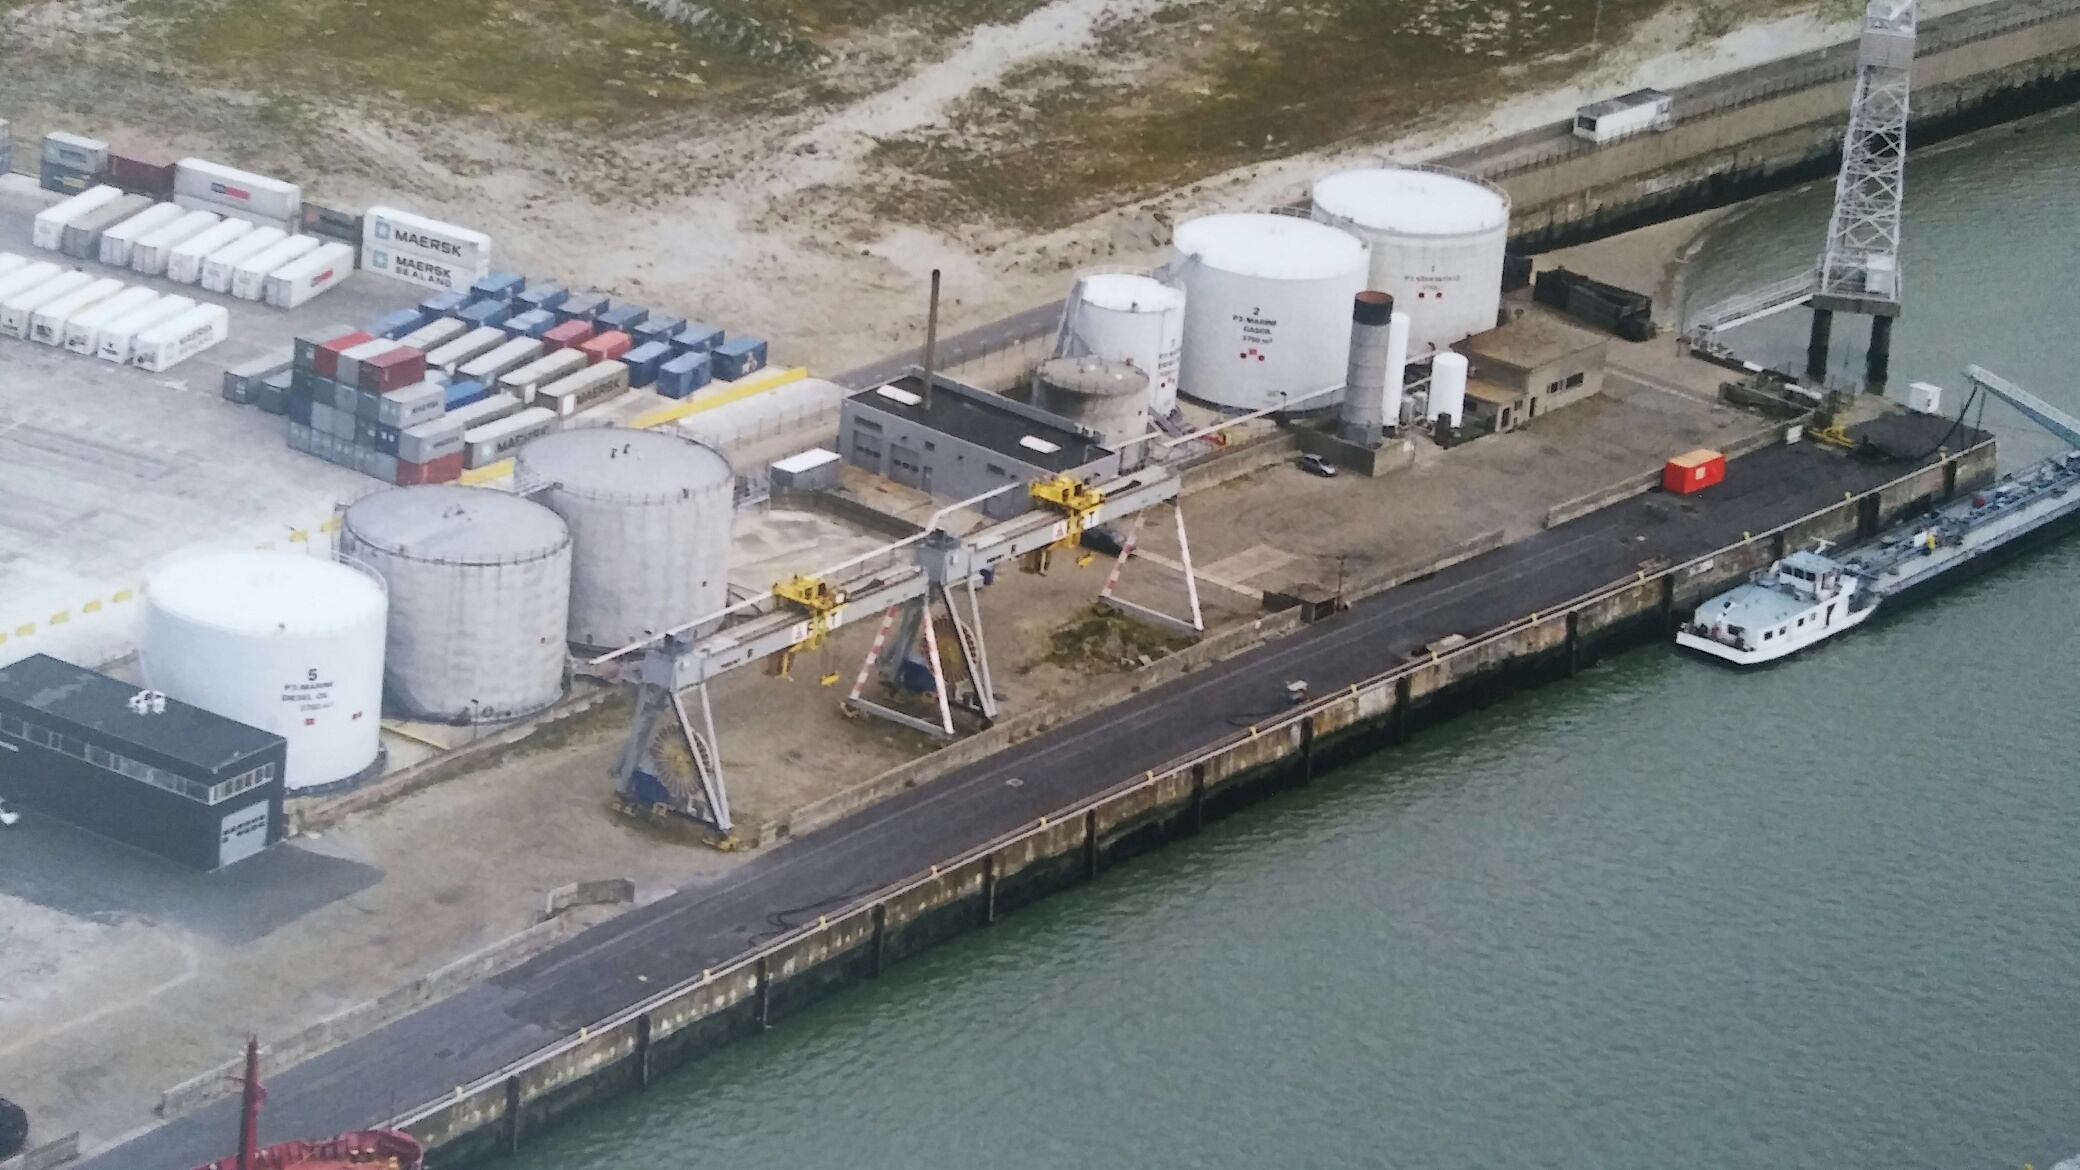 THE PRAX GROUP ACQUIRES OIL TERMINAL IN THE PORT OF ZEEBRUGGE